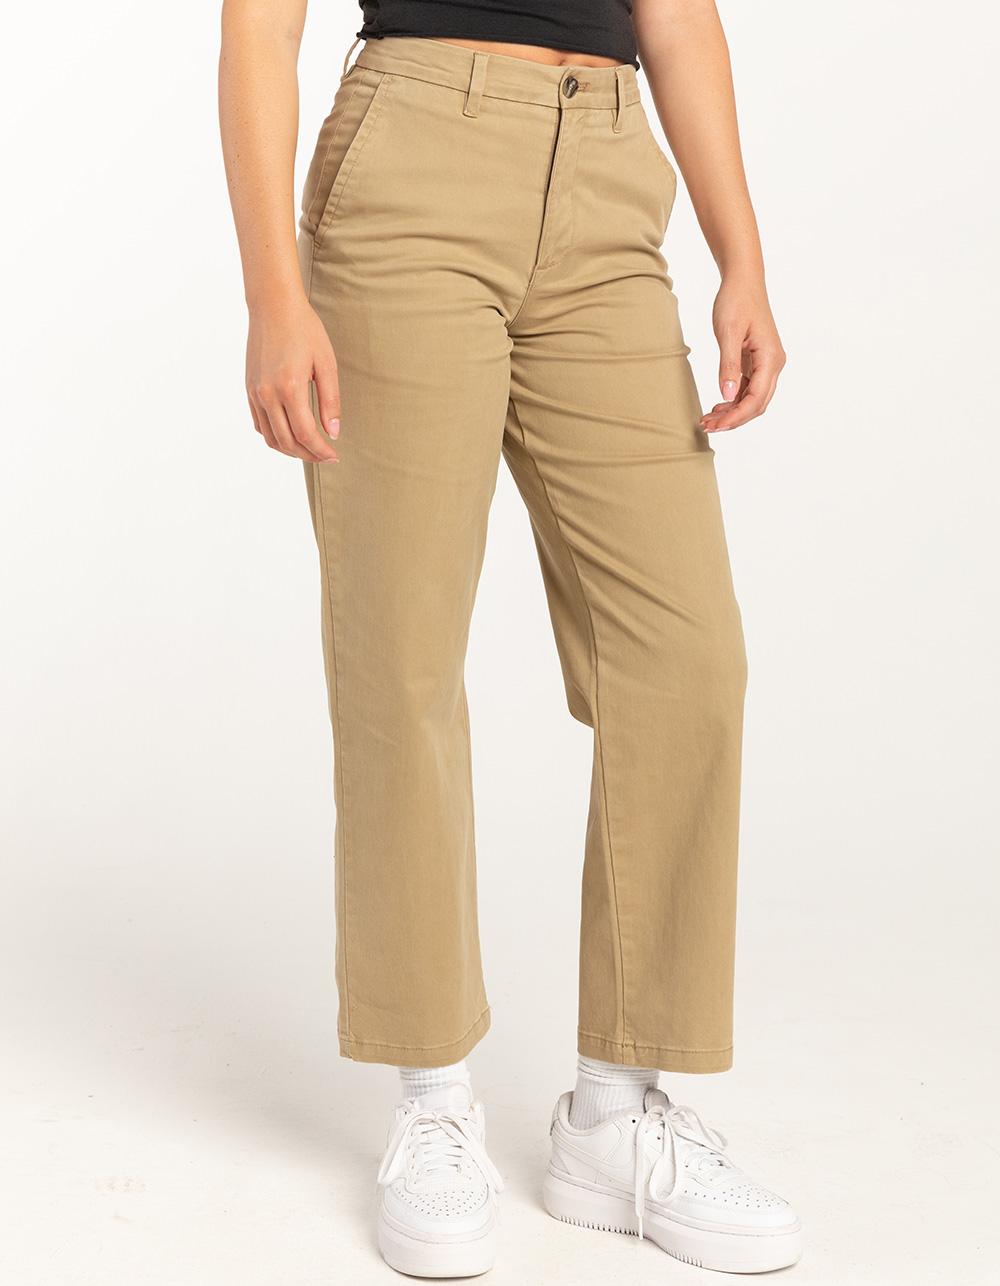 Dockers Women's Skinny Fit Weekend Chino Pants, (New) Harvest Gold